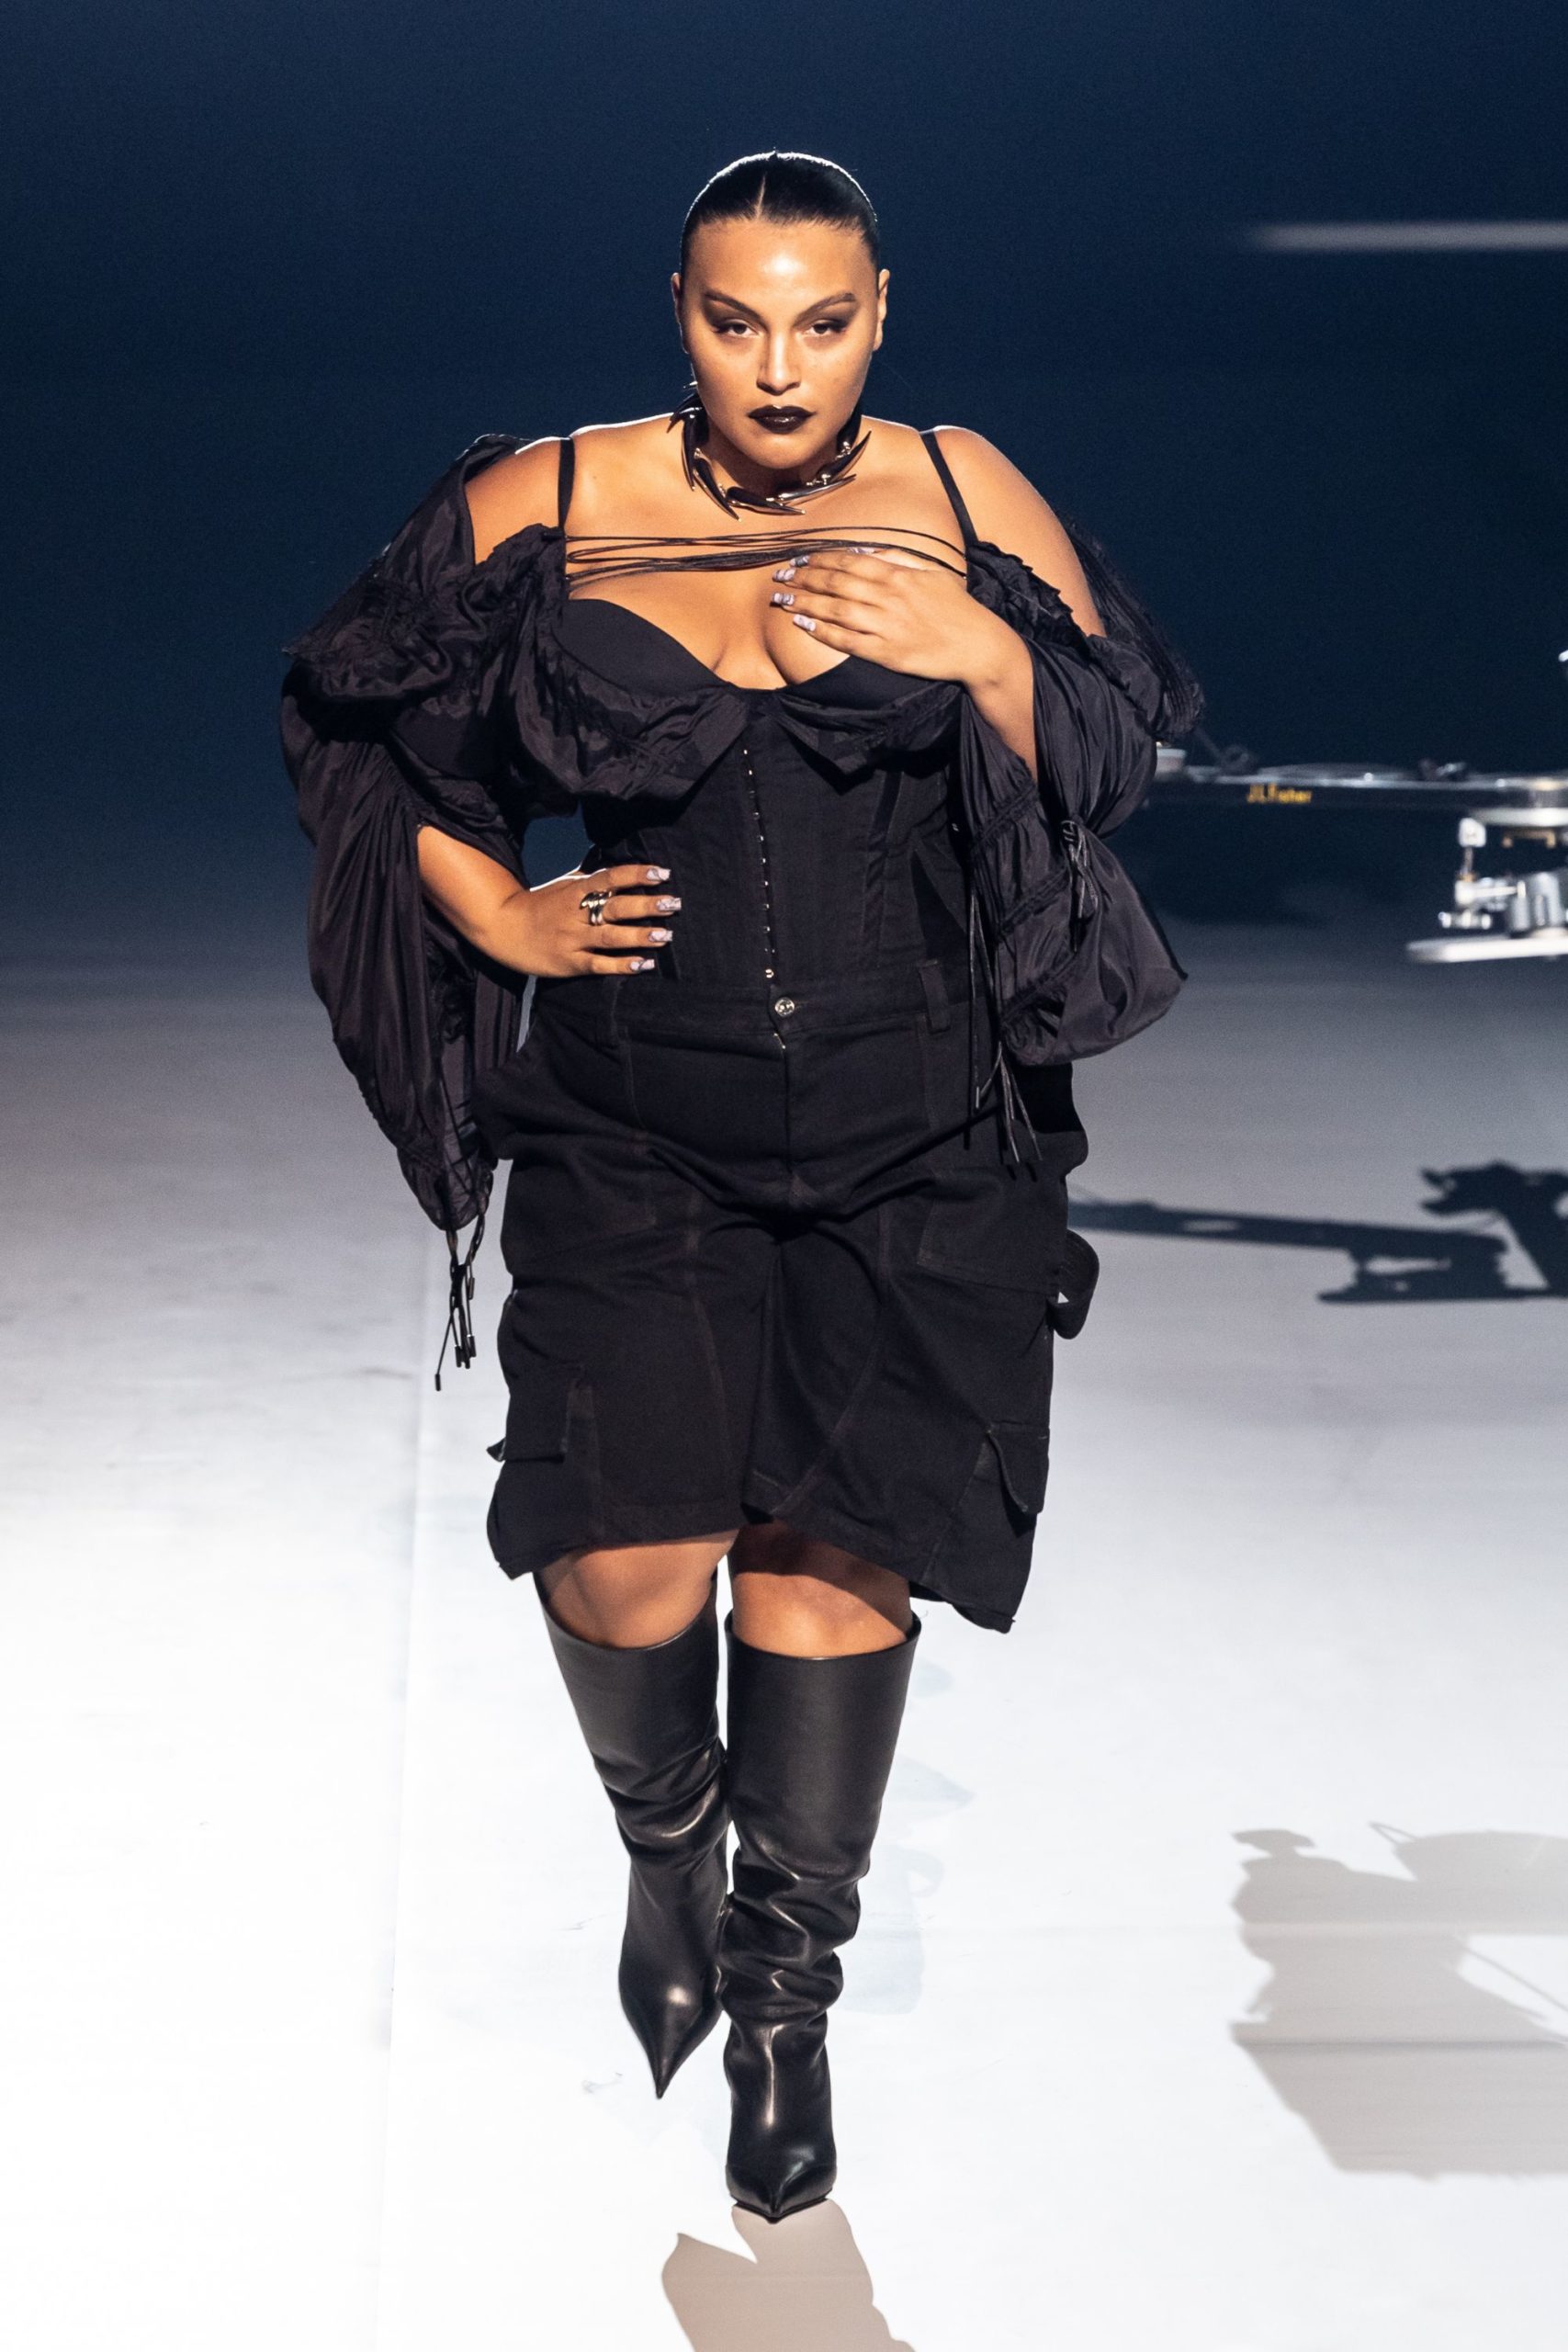 Less Than 1% of Looks at Fashion Month This Year Were Plus-Size